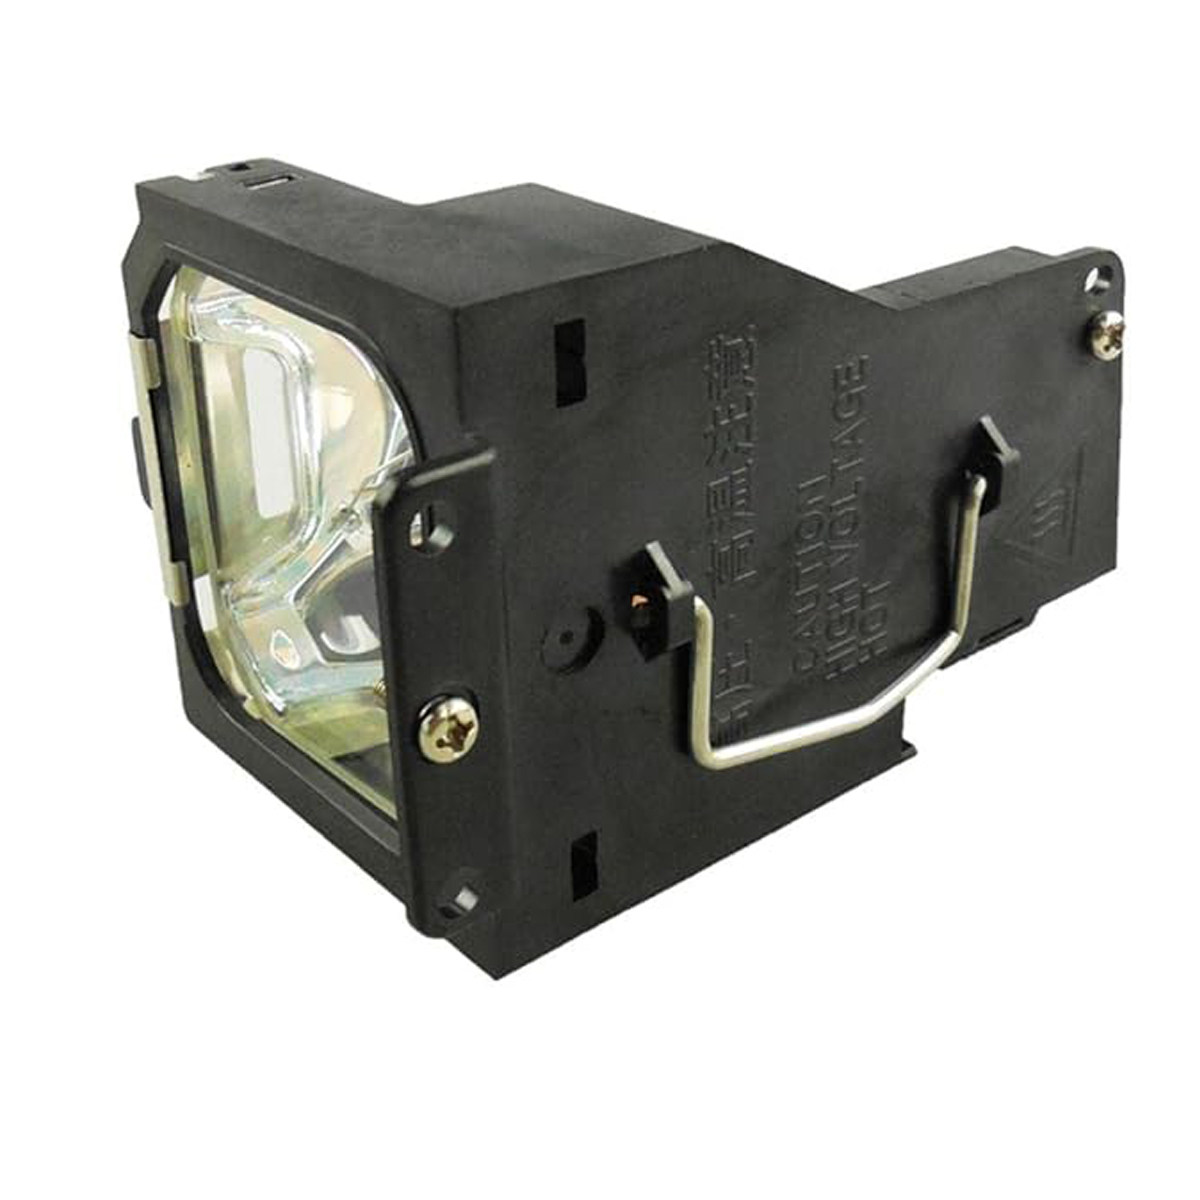 Replacement Projector lamp POA-LMP54 For SANYO PLV-Z1